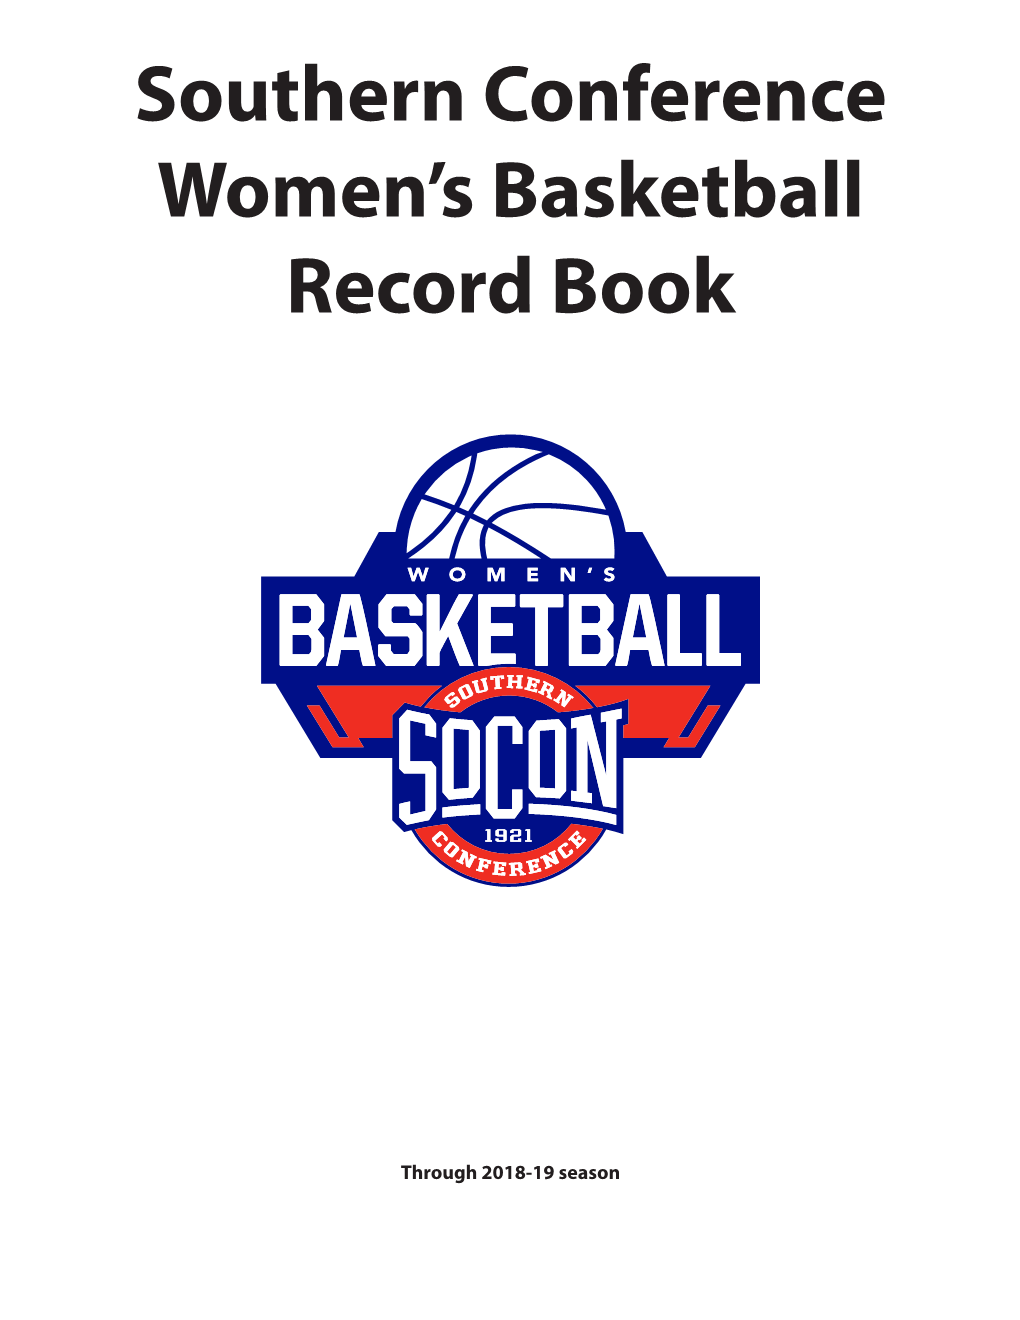 Southern Conference Women's Basketball Record Book